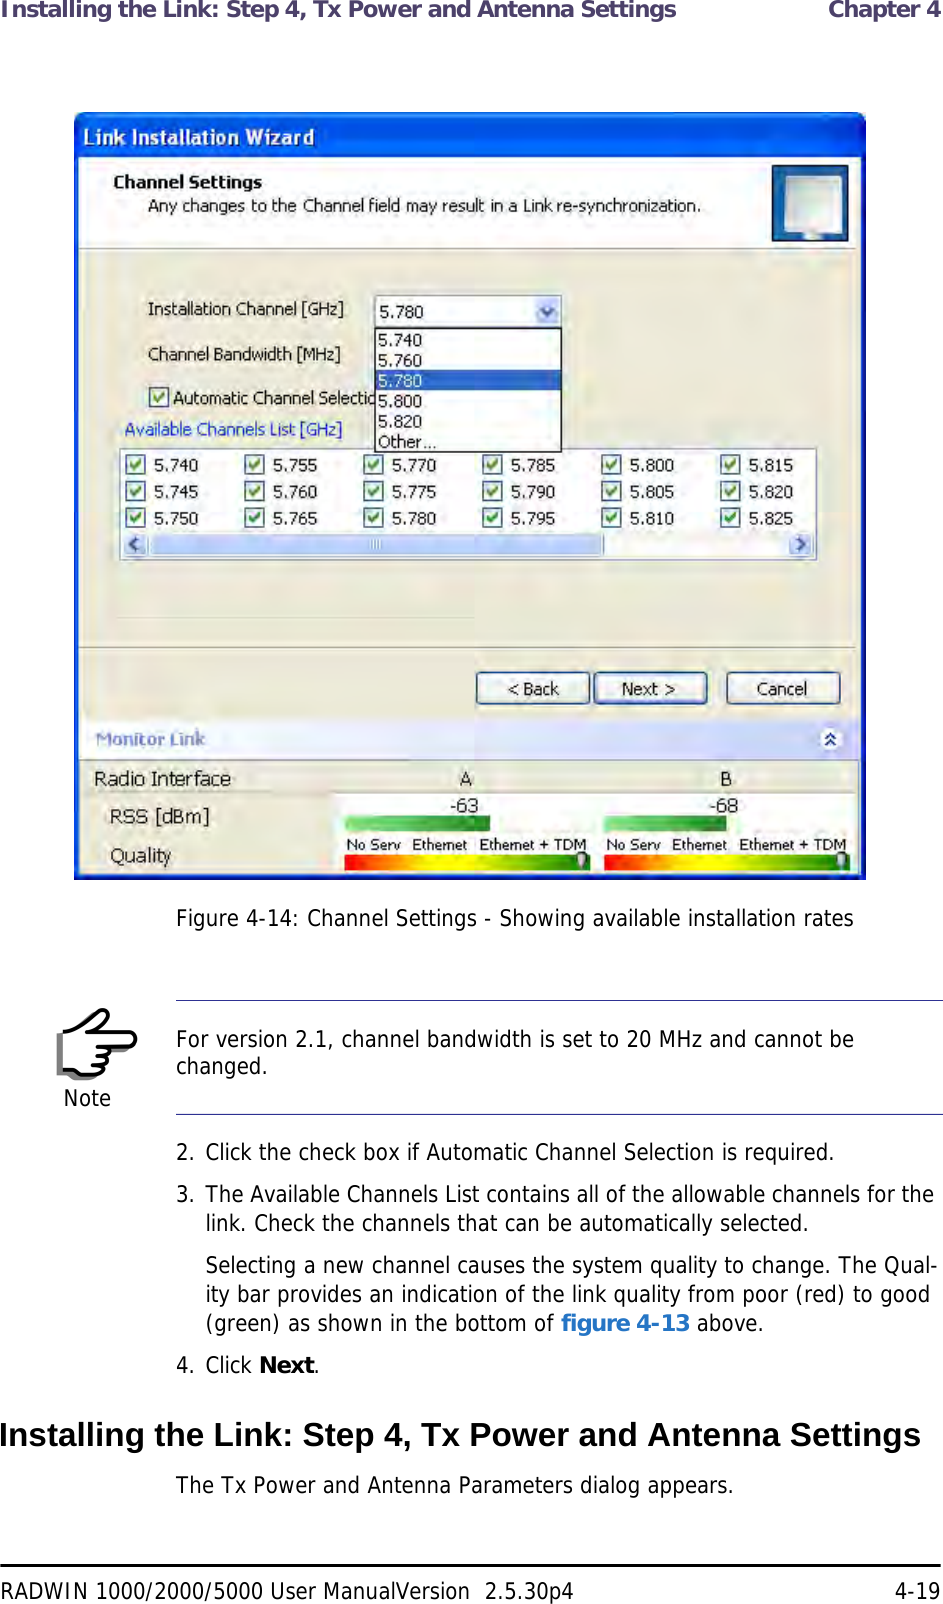 Installing the Link: Step 4, Tx Power and Antenna Settings  Chapter 4RADWIN 1000/2000/5000 User ManualVersion  2.5.30p4 4-19Figure 4-14: Channel Settings - Showing available installation rates2. Click the check box if Automatic Channel Selection is required.3. The Available Channels List contains all of the allowable channels for the link. Check the channels that can be automatically selected.Selecting a new channel causes the system quality to change. The Qual-ity bar provides an indication of the link quality from poor (red) to good (green) as shown in the bottom of figure 4-13 above.4. Click Next.Installing the Link: Step 4, Tx Power and Antenna SettingsThe Tx Power and Antenna Parameters dialog appears.NoteFor version 2.1, channel bandwidth is set to 20 MHz and cannot be changed.